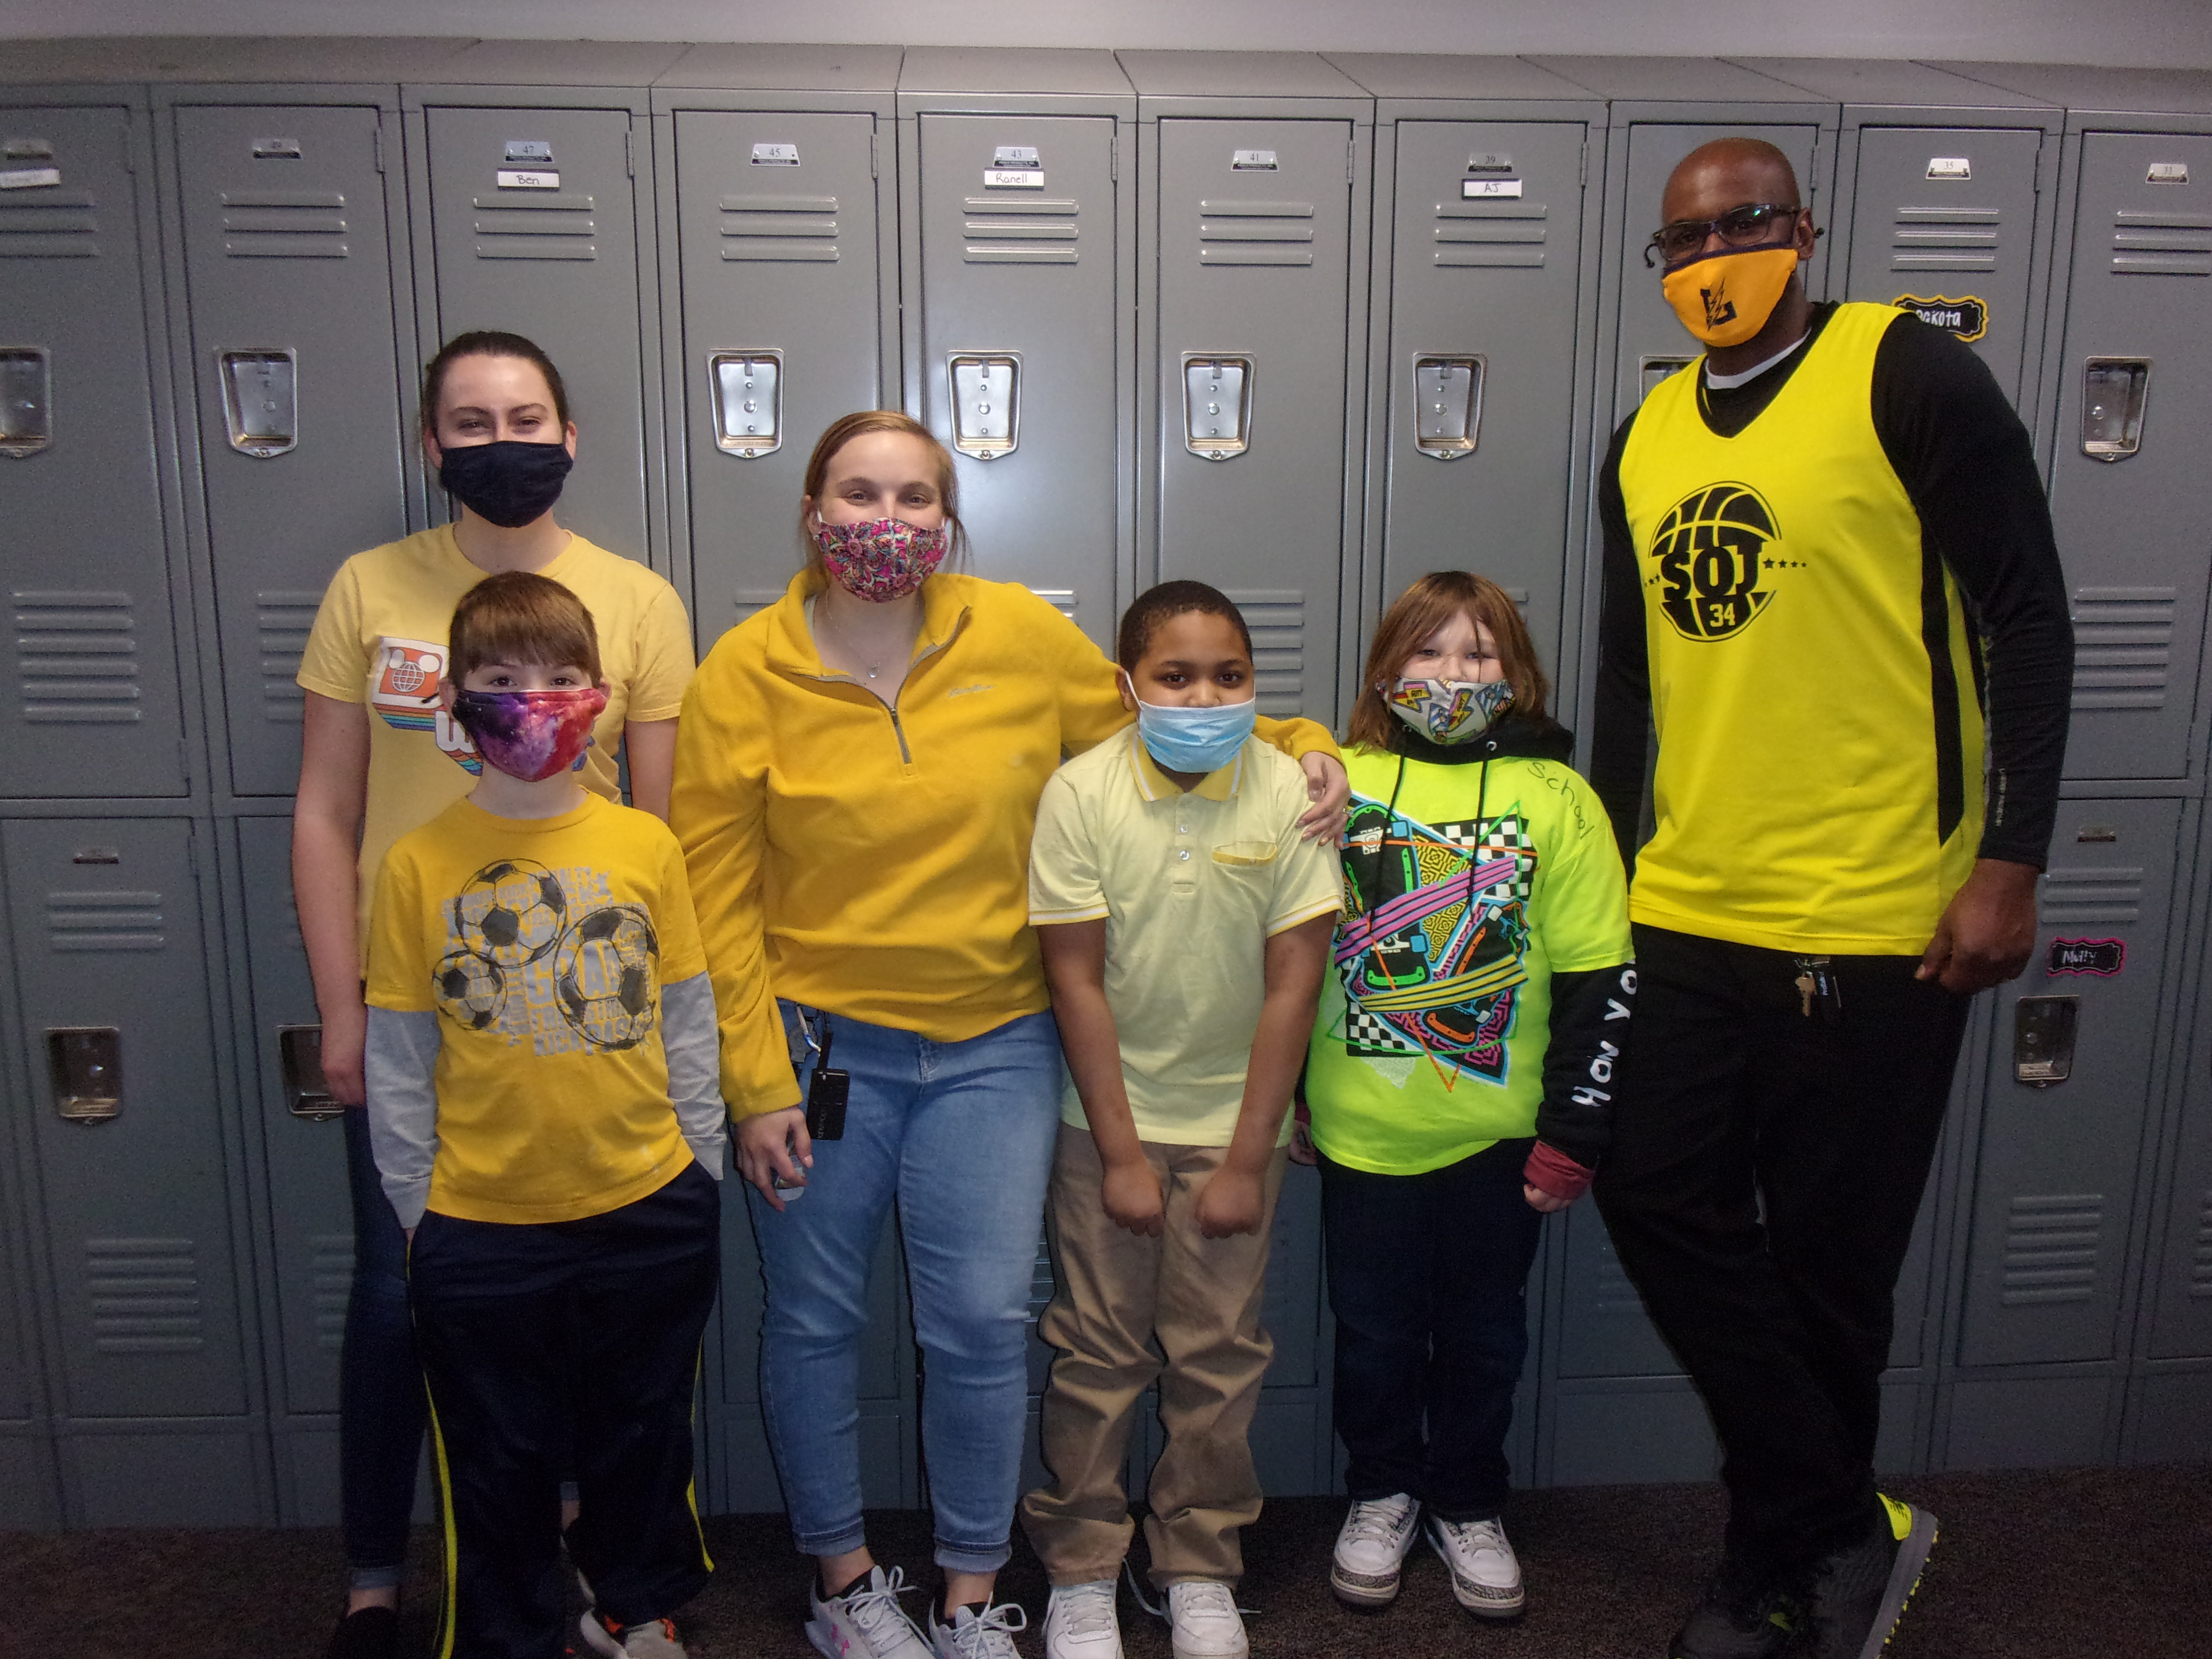 Students and Teachers dressed in shades of yellow pose by a bank of lockers. They're all wearing facemasks